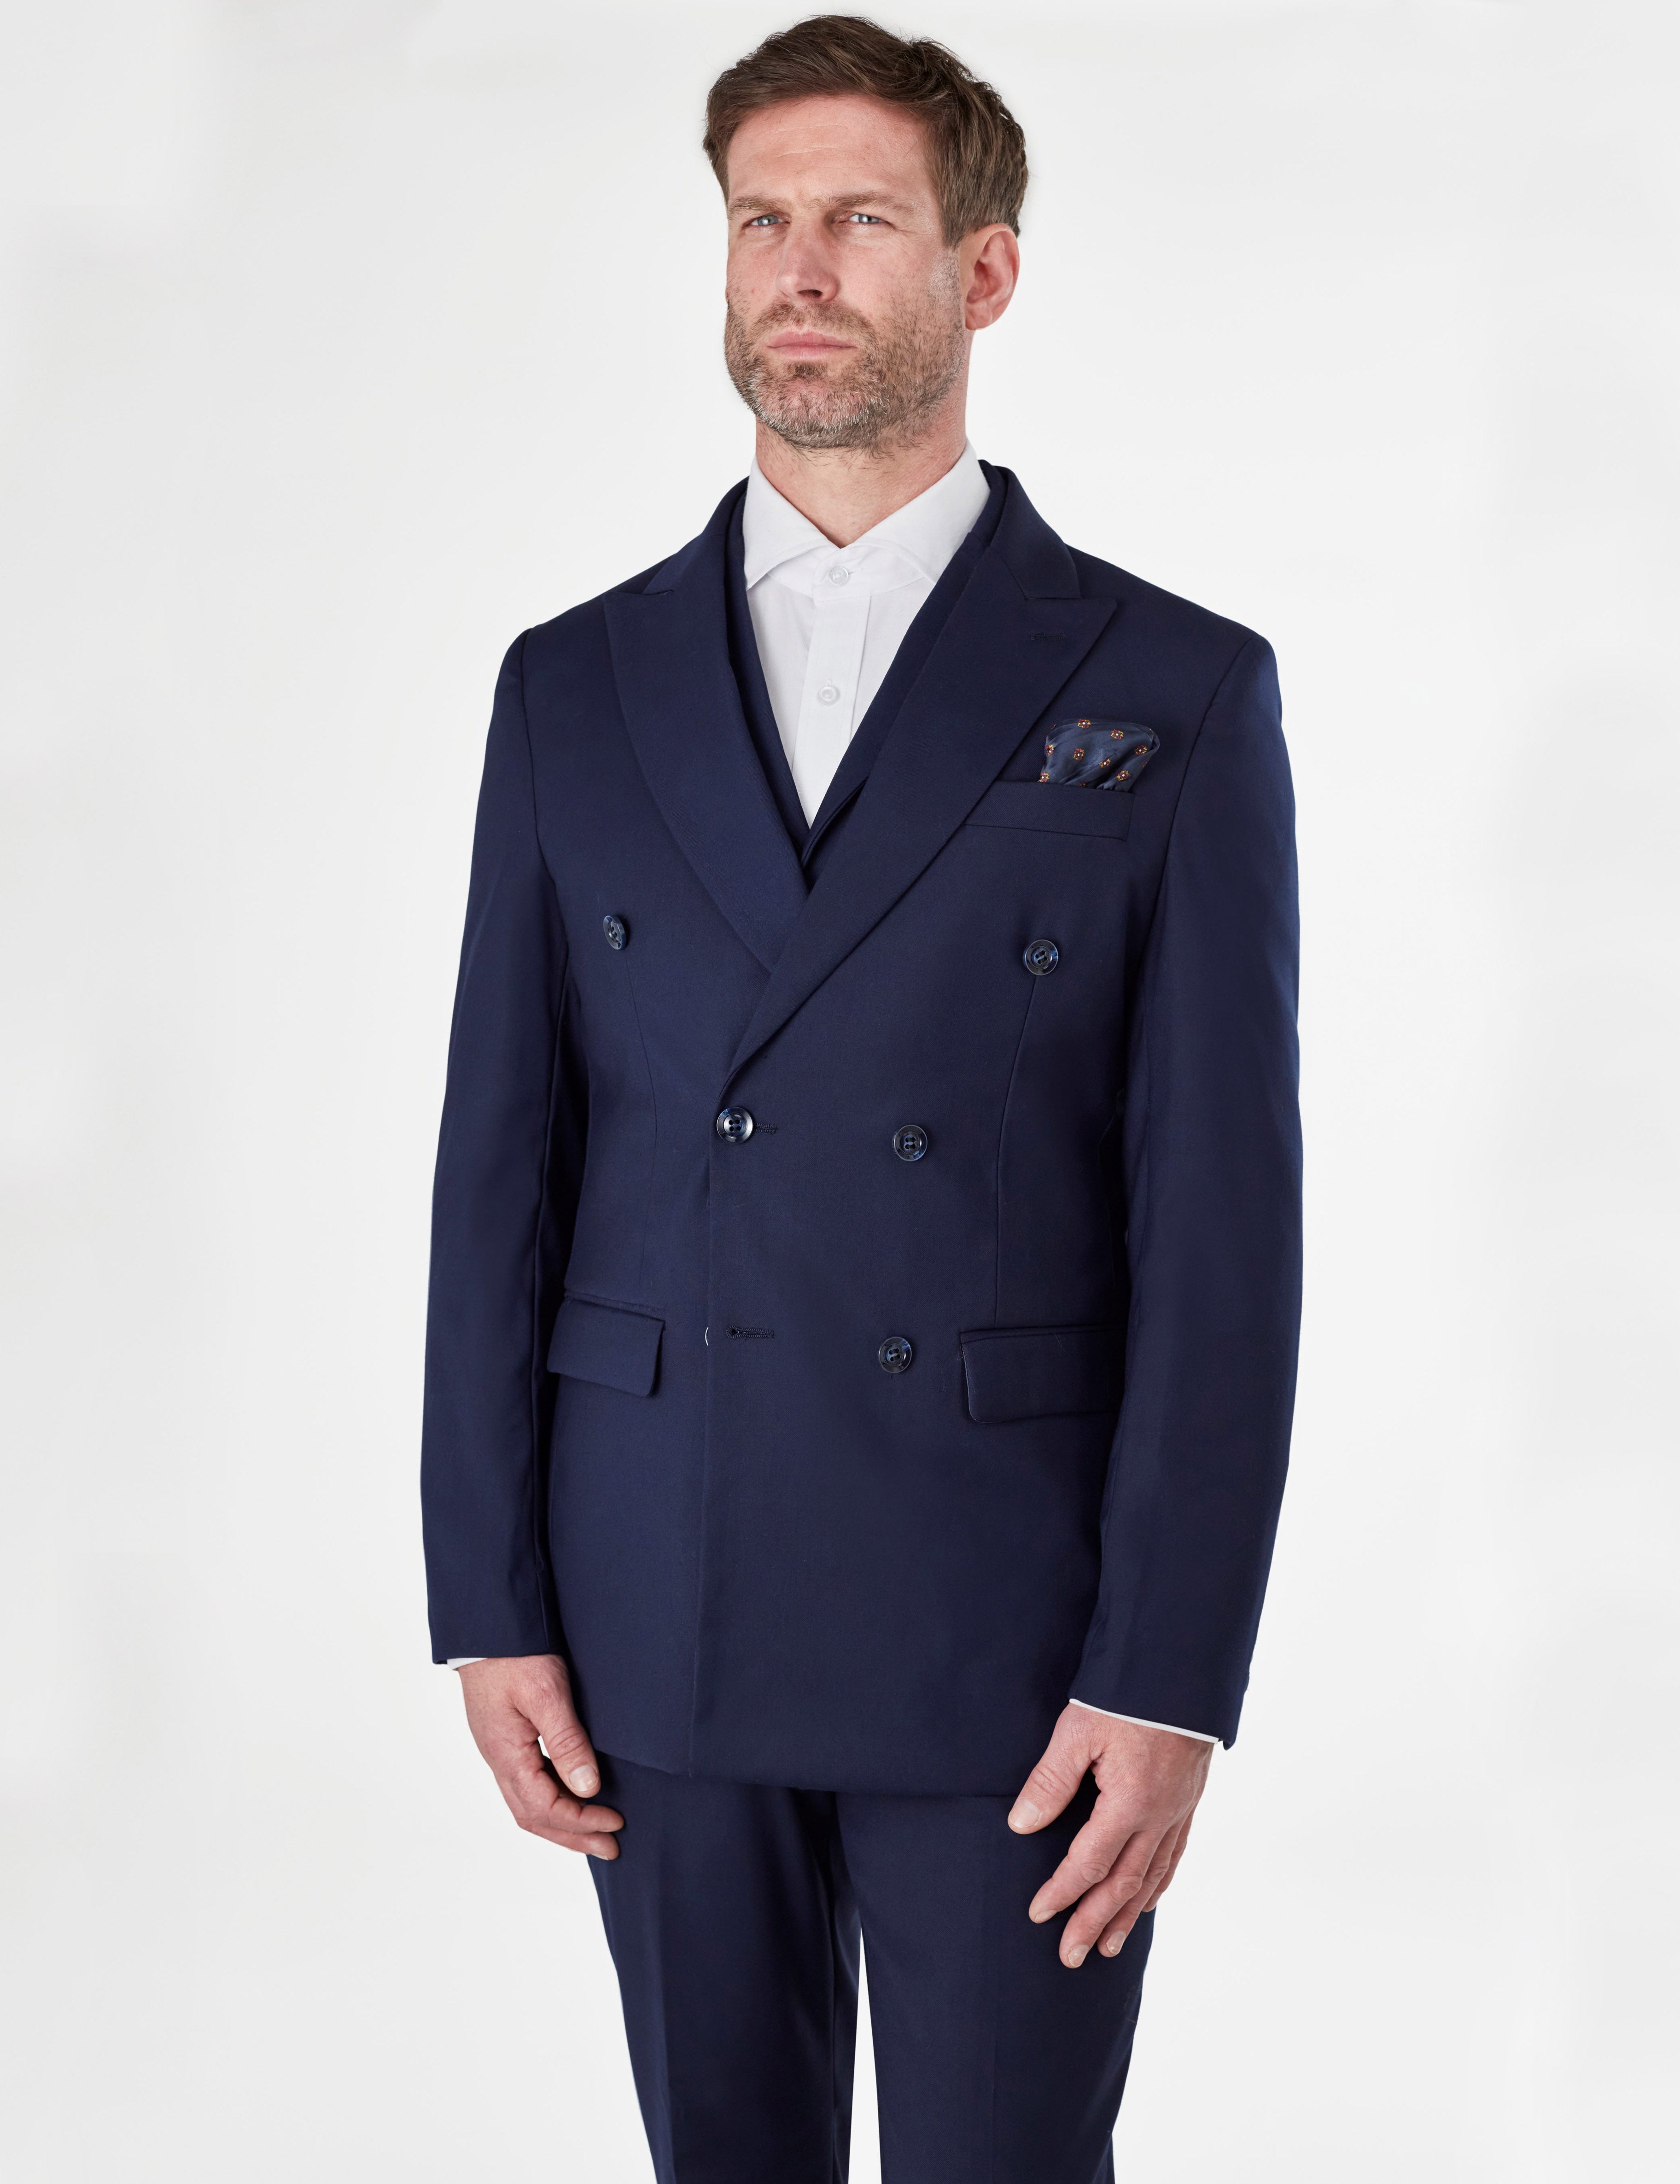 GRAHAM - NAVY DOUBLE BREASTED SUIT